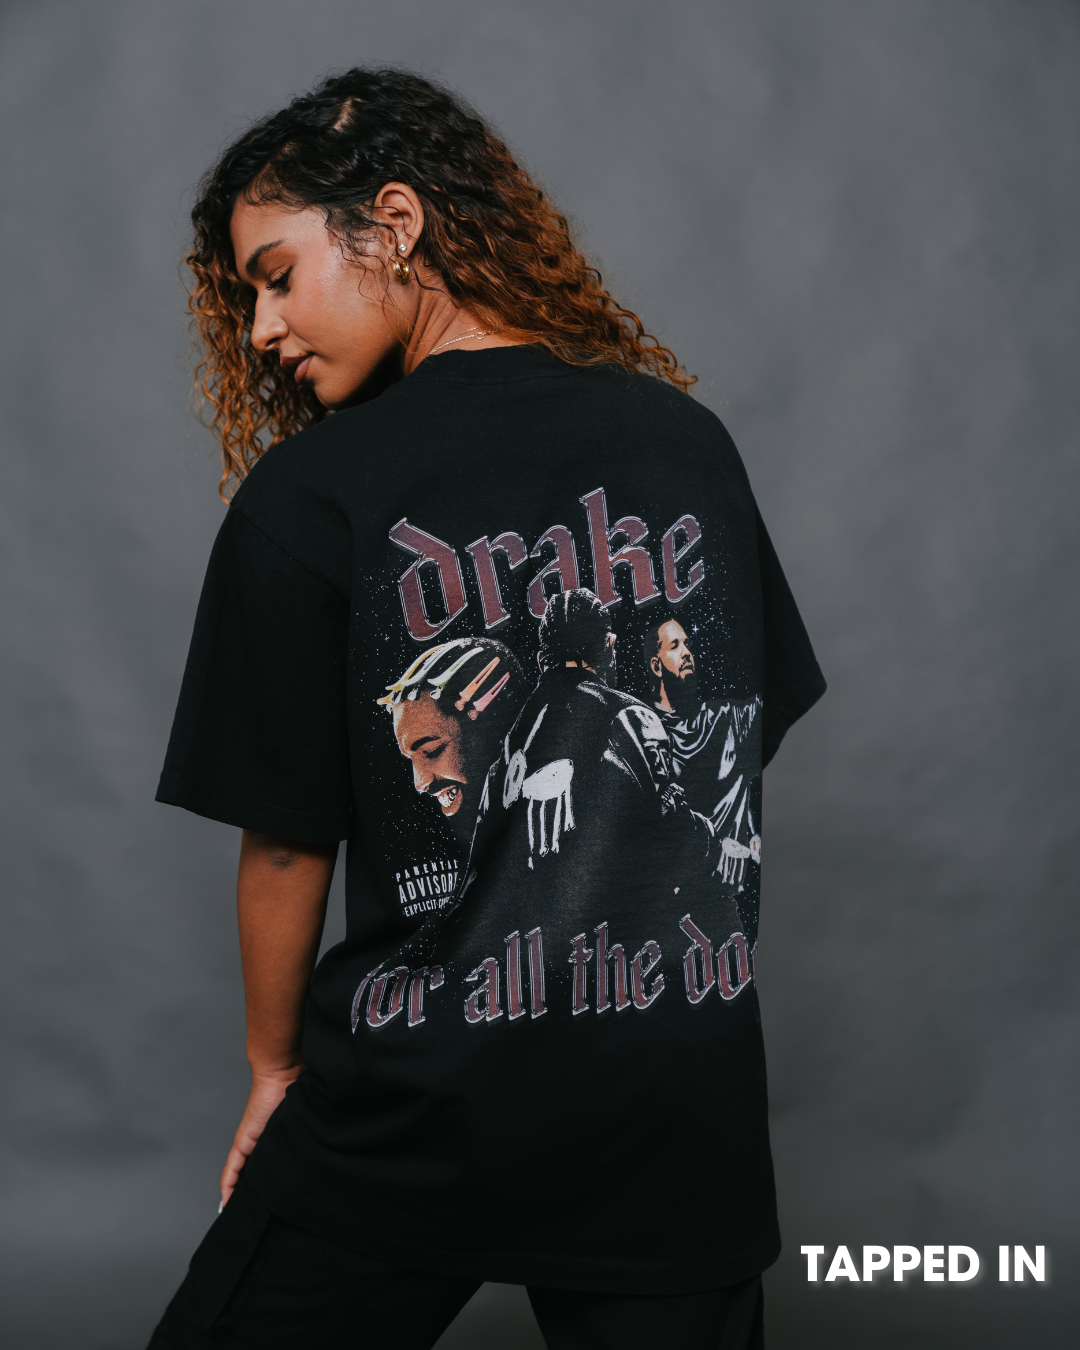 "For All The Dogs" T-Shirt